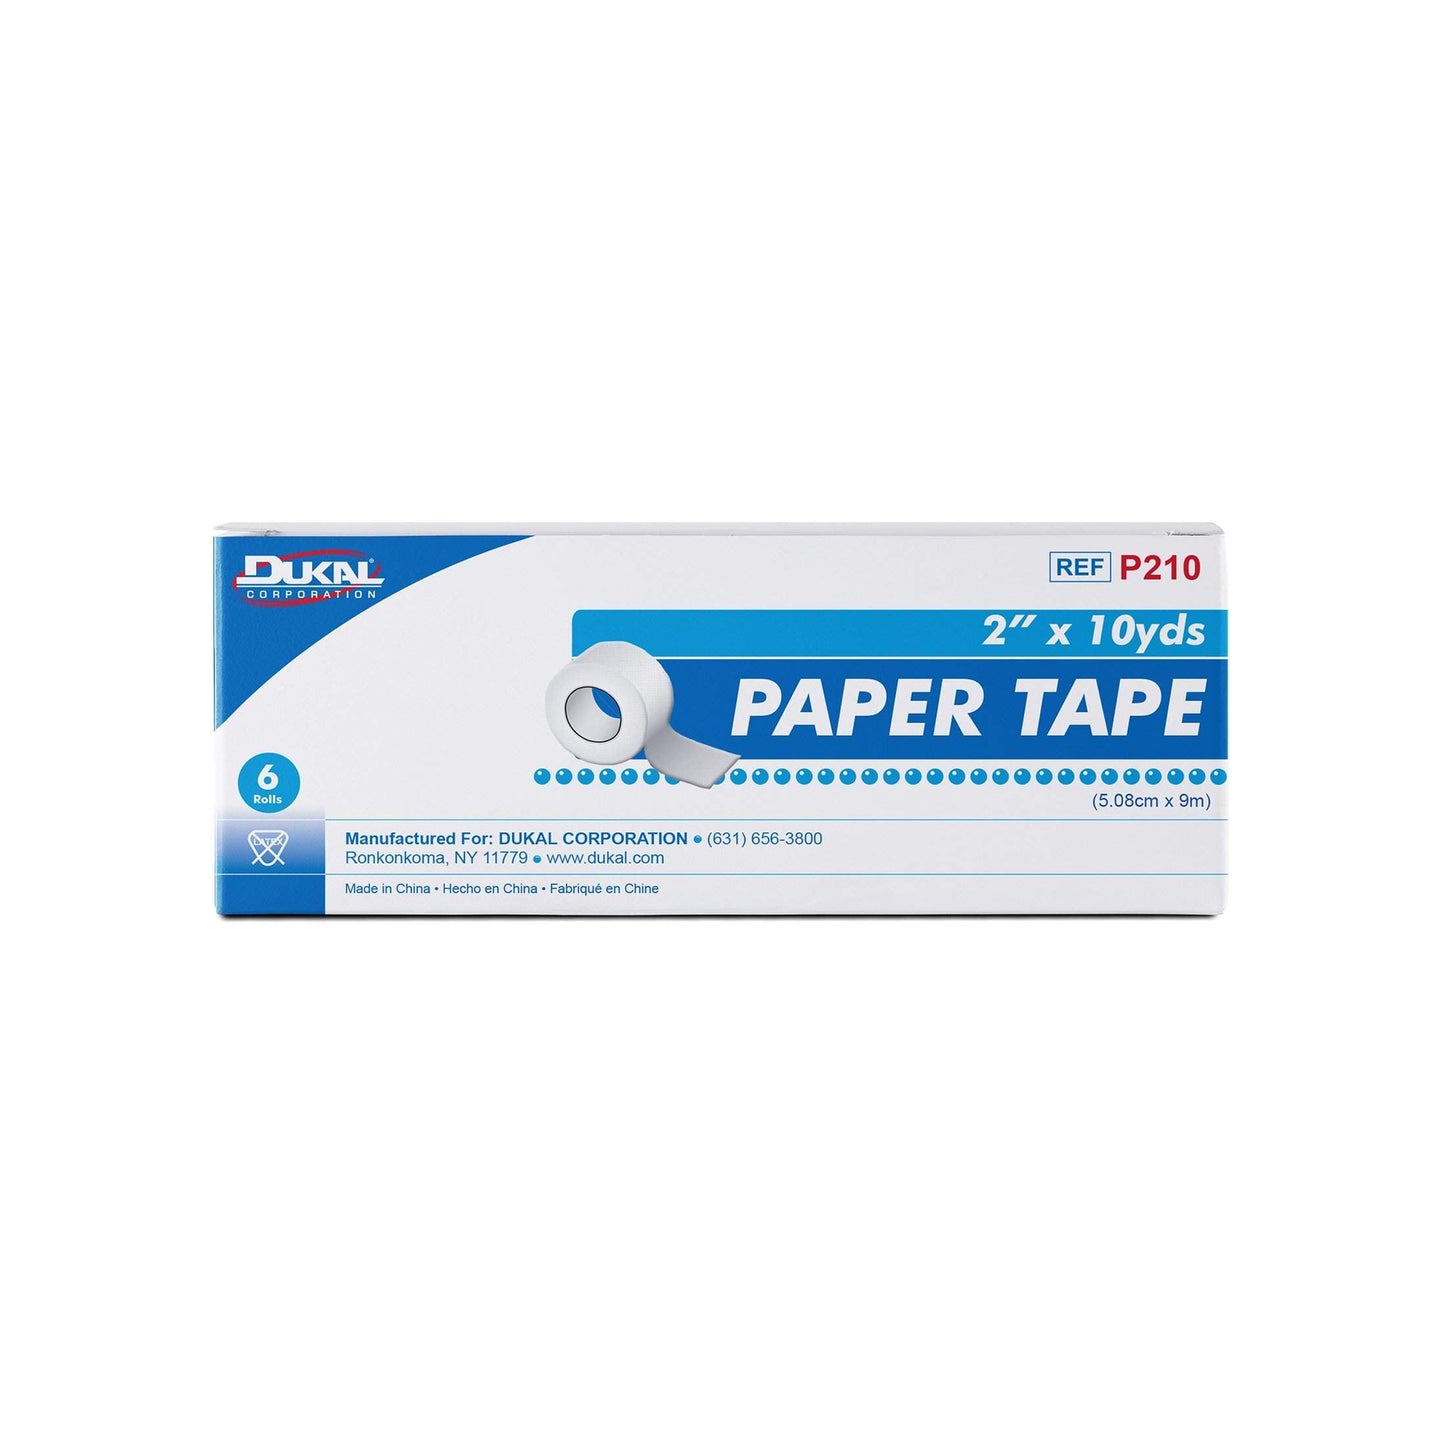 Dukal HP Paper Tape 2" X 10 YARDS - 6 PACK-Dukal-Brand_Dukal/ Dawn Mist,Collection_Lifestyle,Dukal_Medical,Dukal_Tapes,Life_Medical,Life_Personal Care